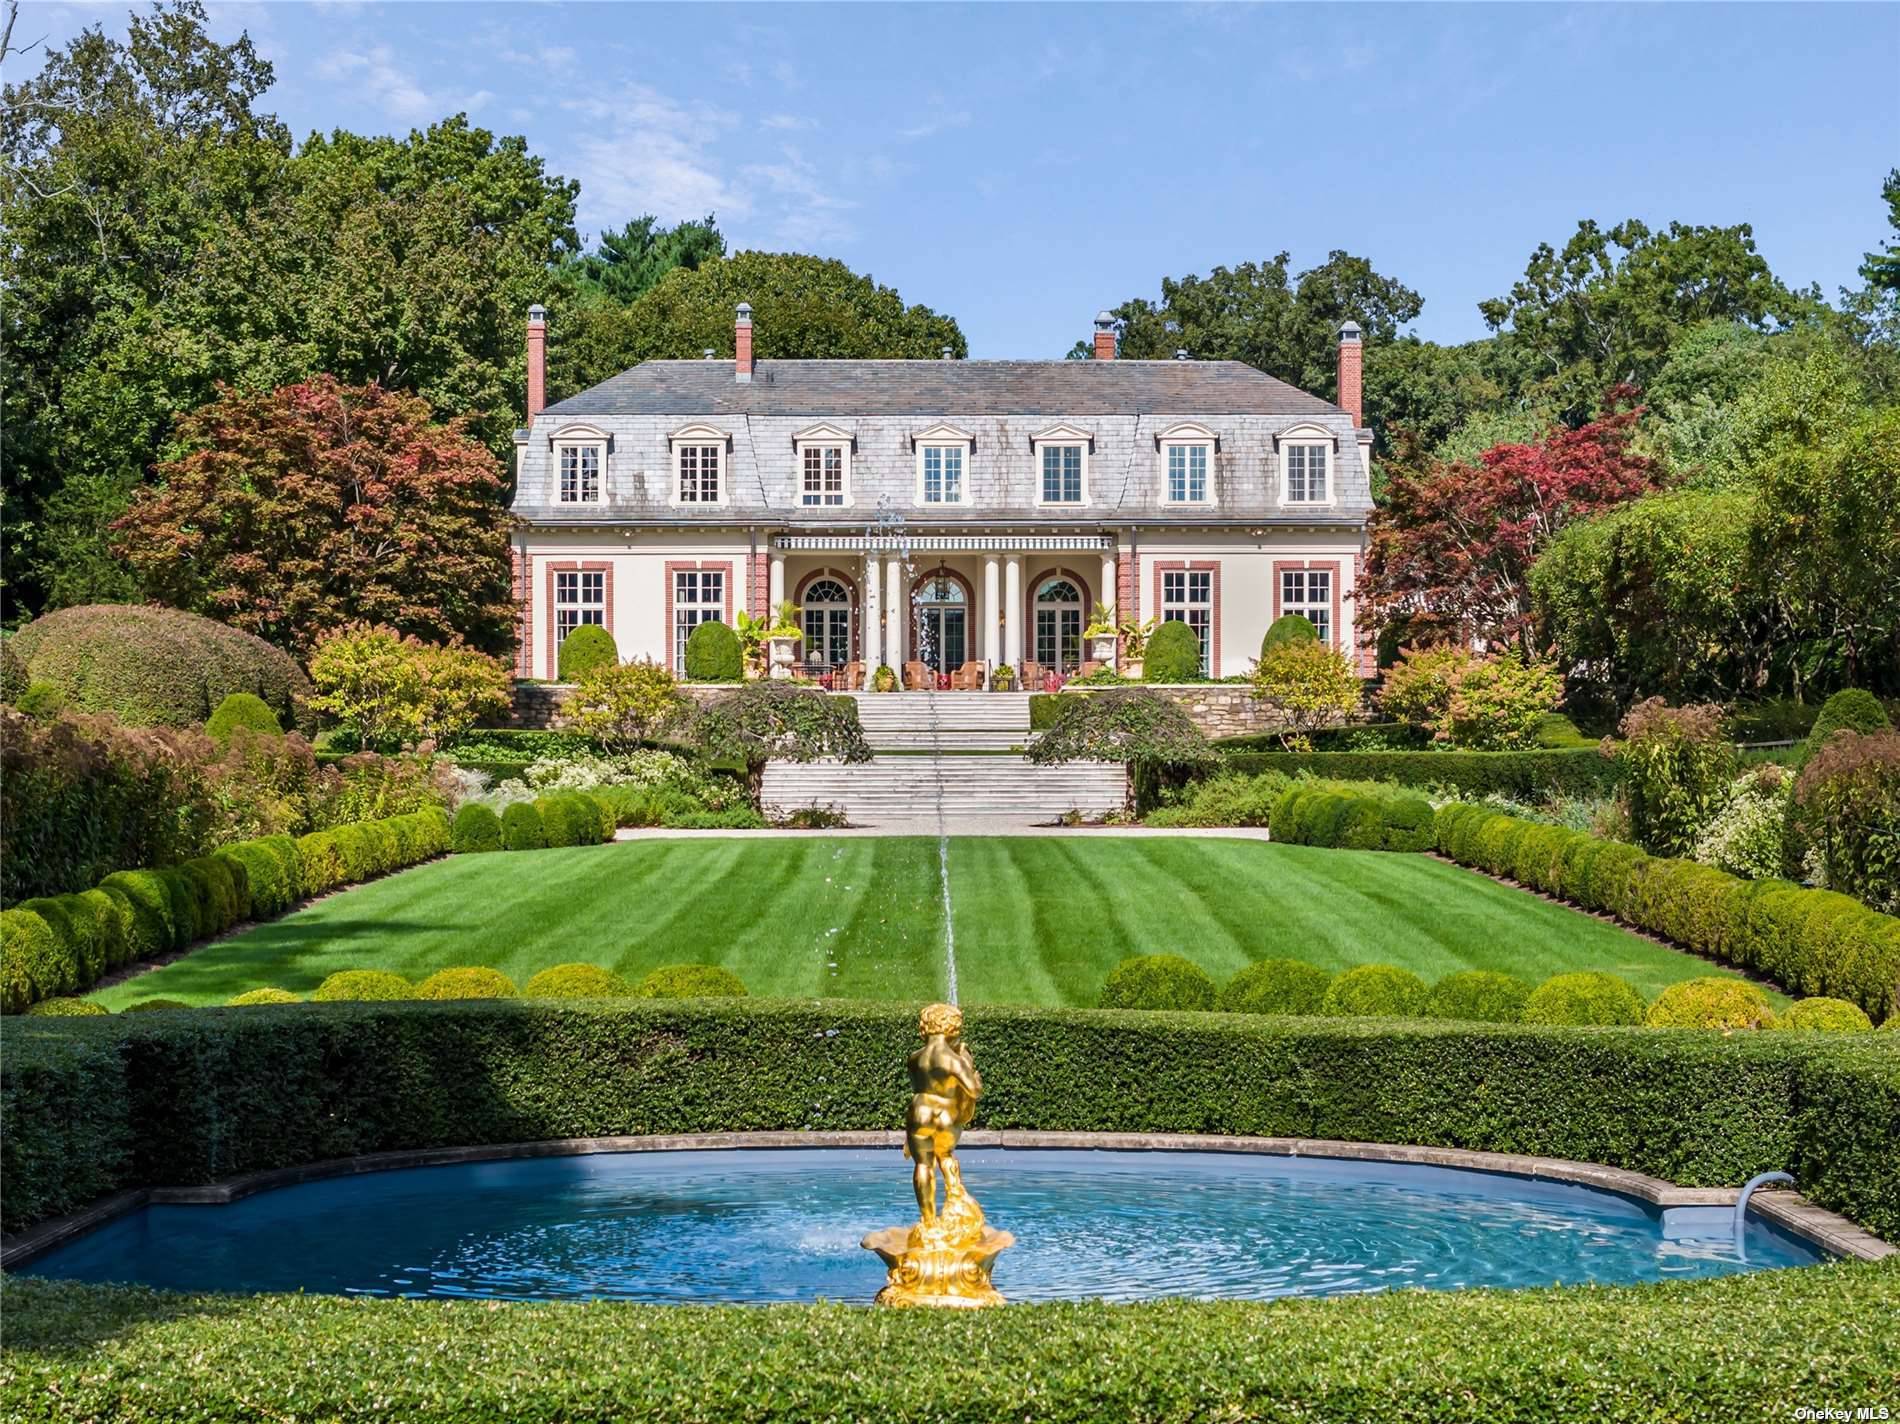 'Haut Bois' is an elegant brick and stucco French Chateau located in the heart of Brookville, NY.